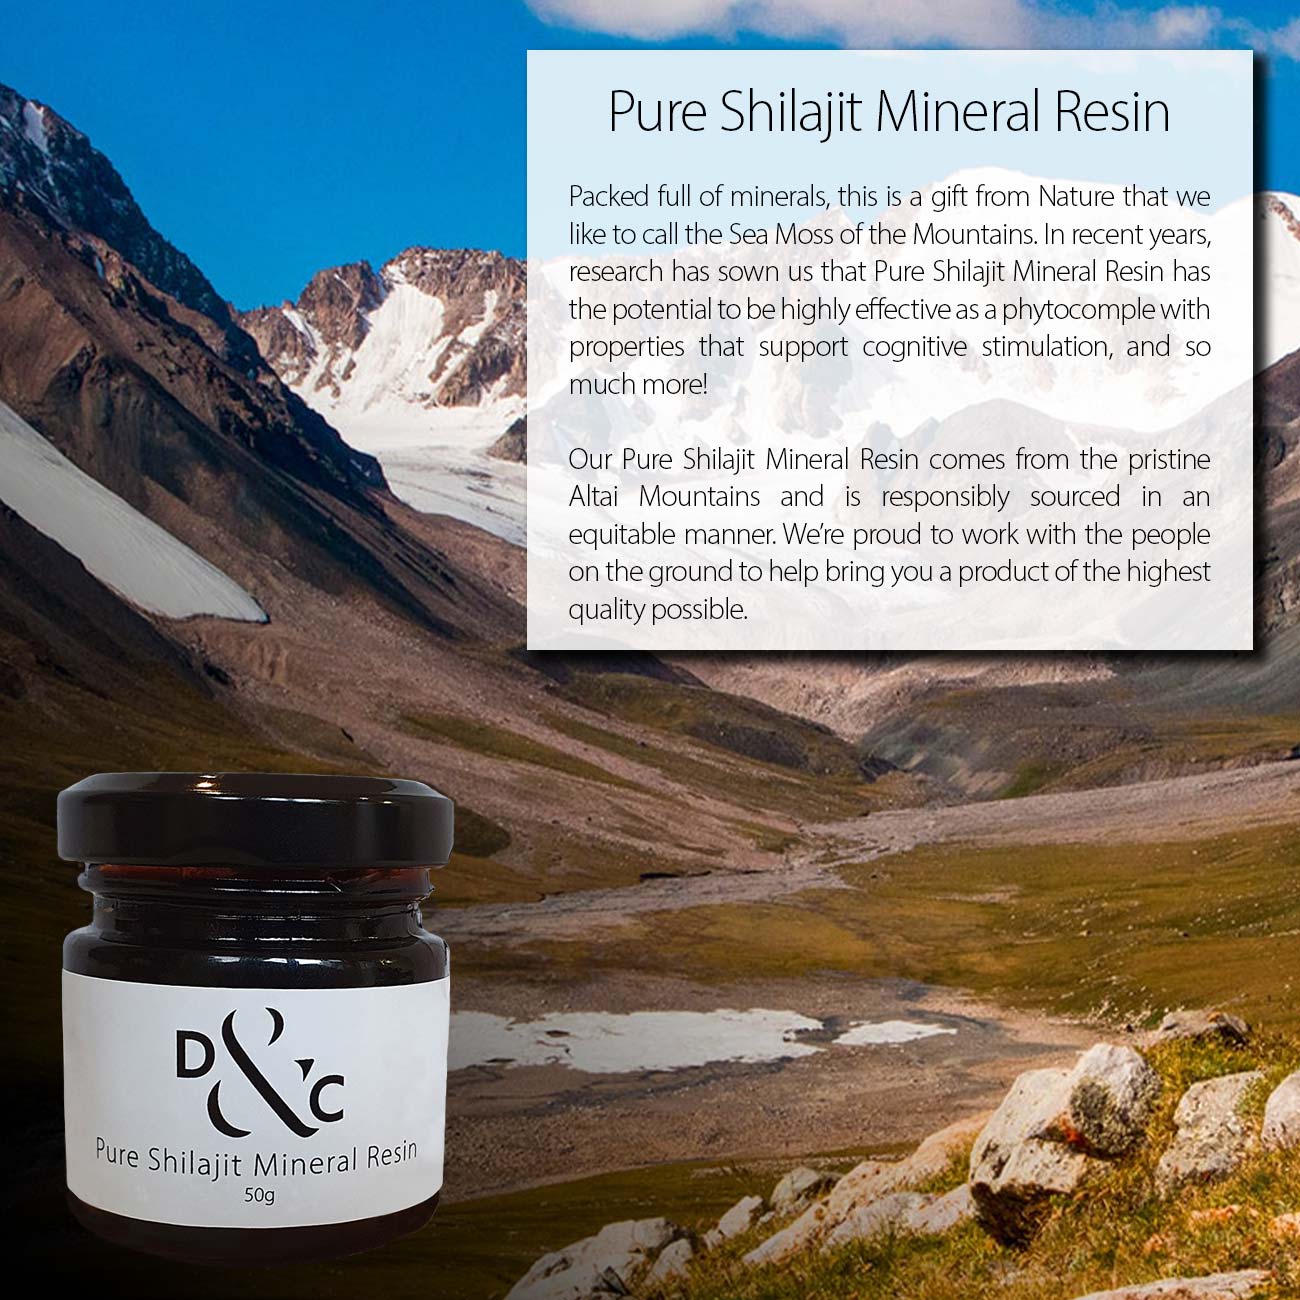 Shilajit gut health explanation of what Shilajit is and where it comes from. This image contains a jar of Detox And Cure Shilajit Resin set in front of a panoramic photograph of the snow-capped Altai Mountains